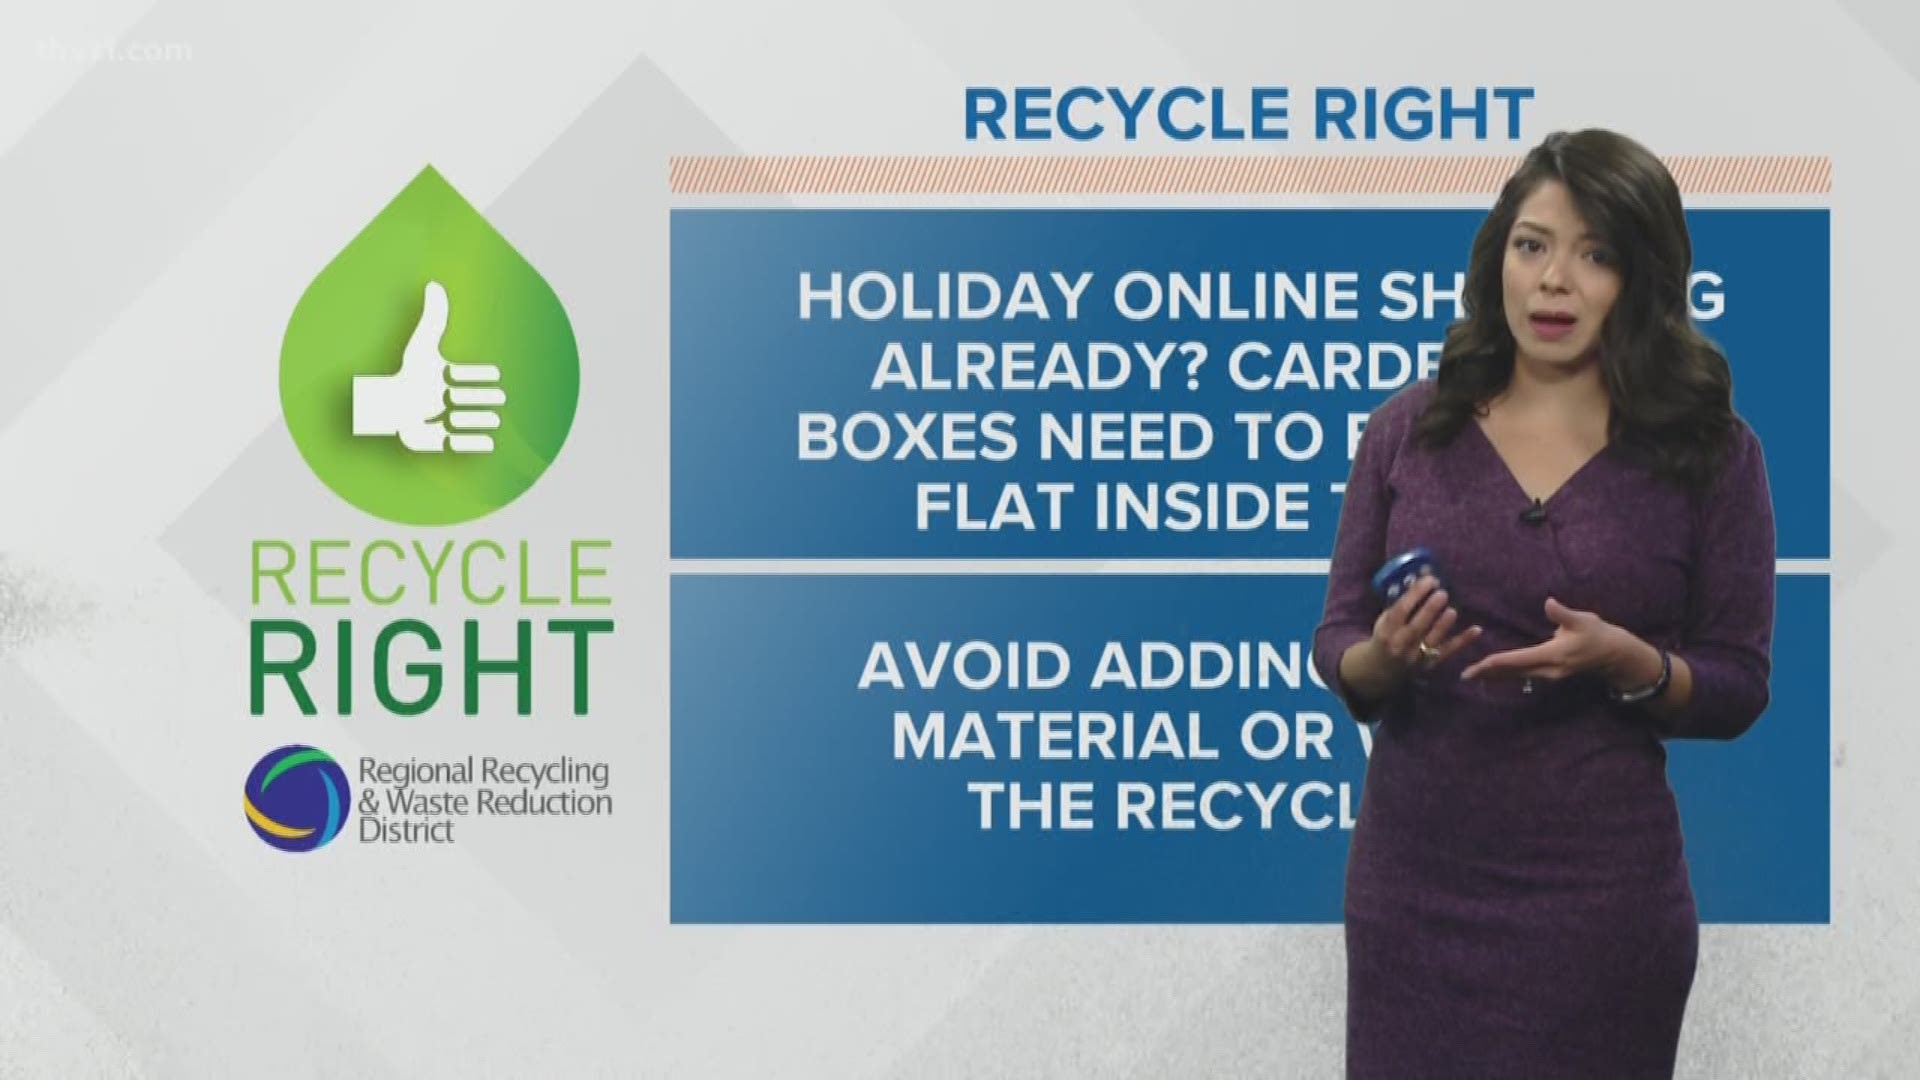 Mariel Ruiz has your Recycle Right tip for week 36.